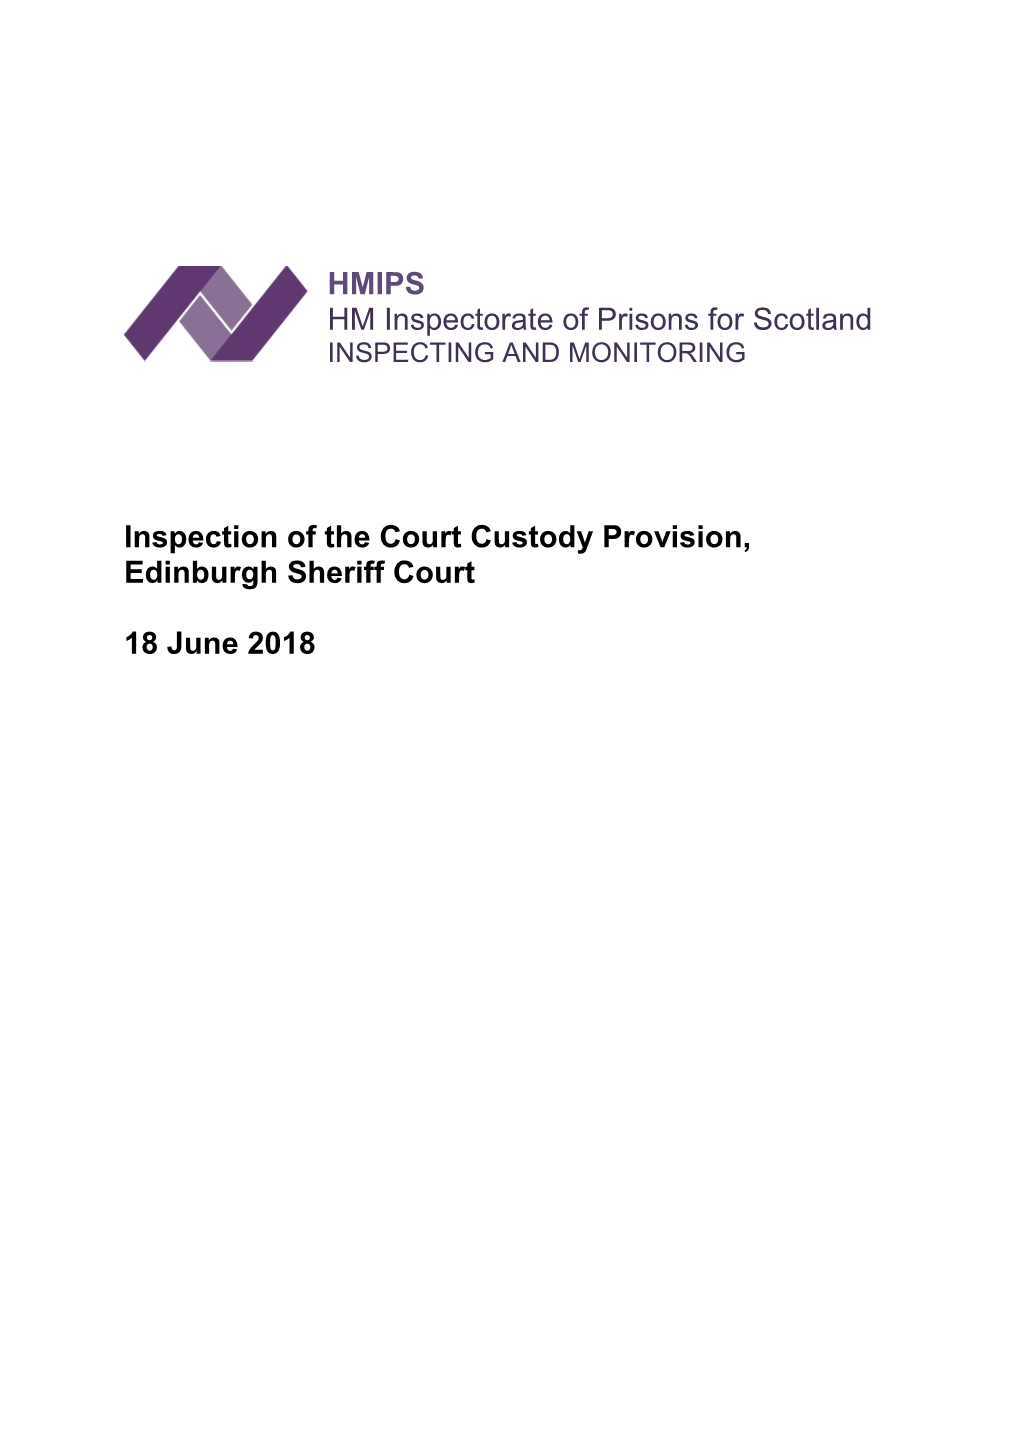 HMIPS HM Inspectorate of Prisons for Scotland Inspection of the Court